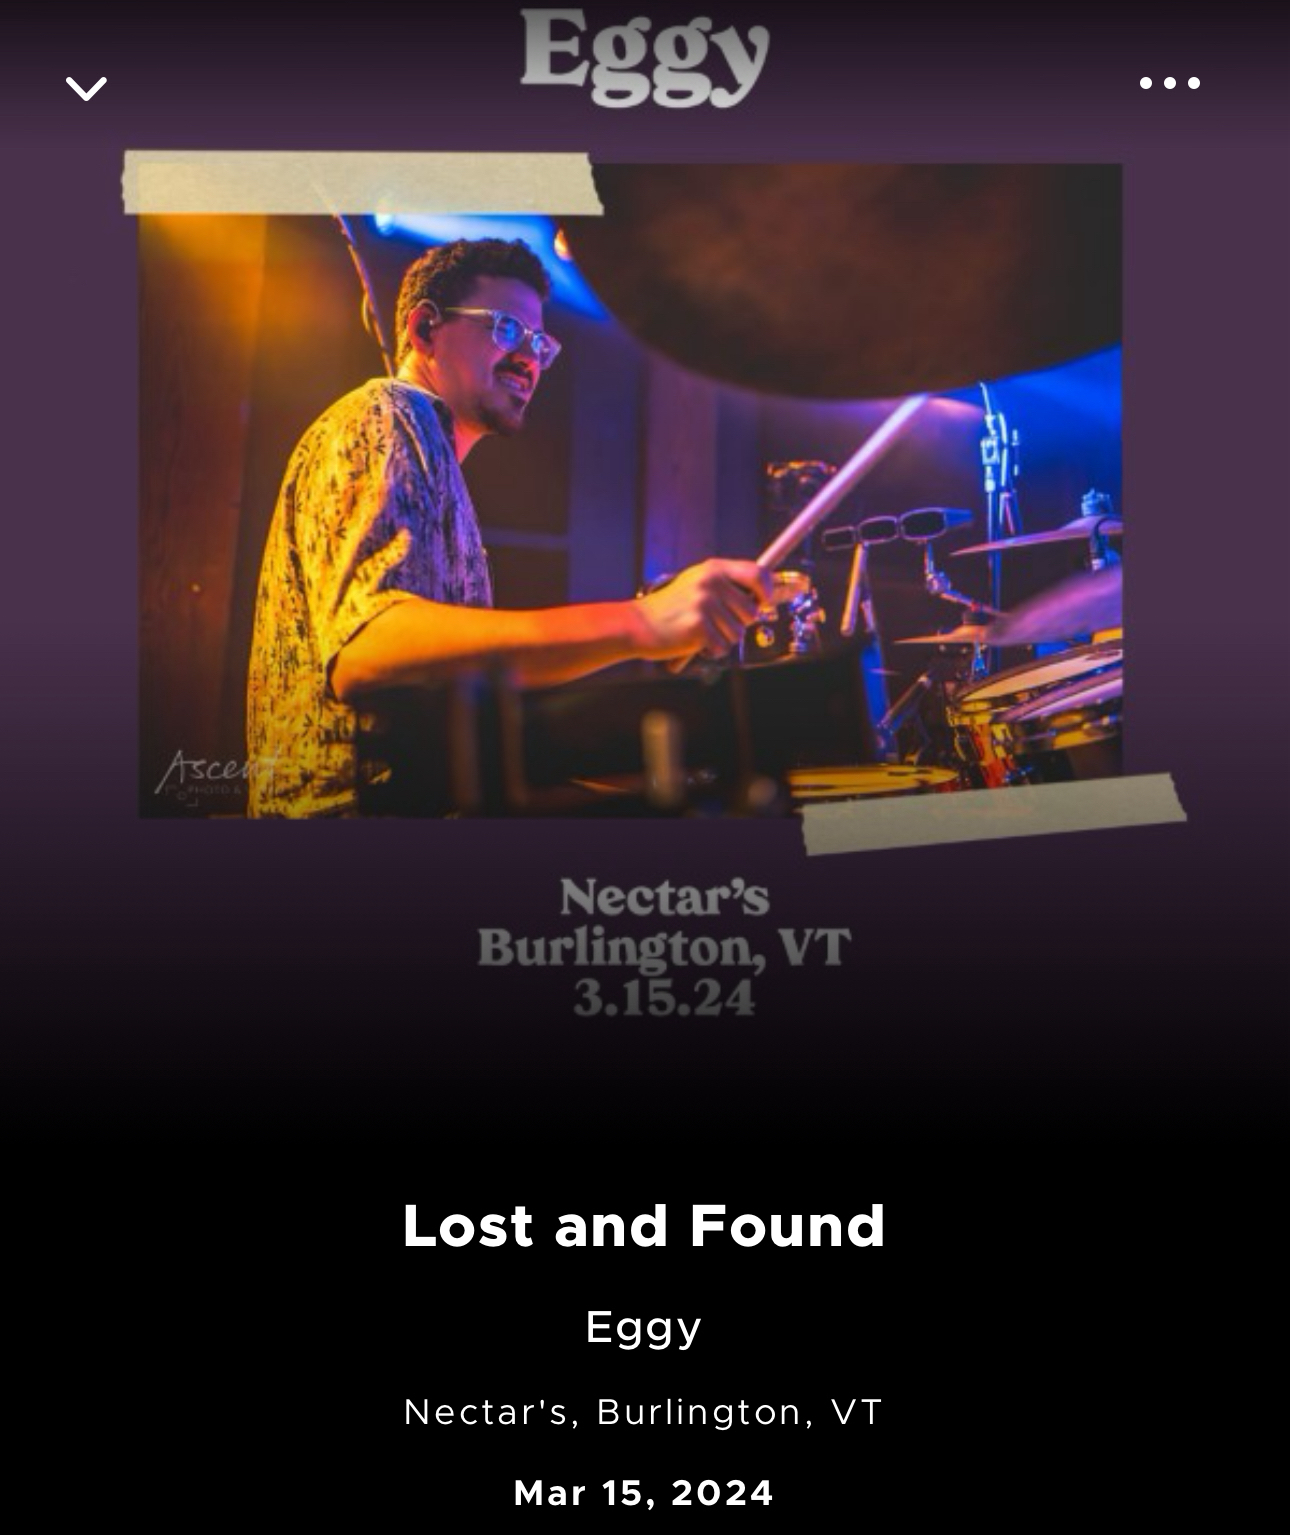 Promotional image for a music event featuring a drummer on stage with the band name “Eggy” at the top, and details of the event “Lost and Found, Eggy, Nectar’s, Burlington, VT, Mar 15,